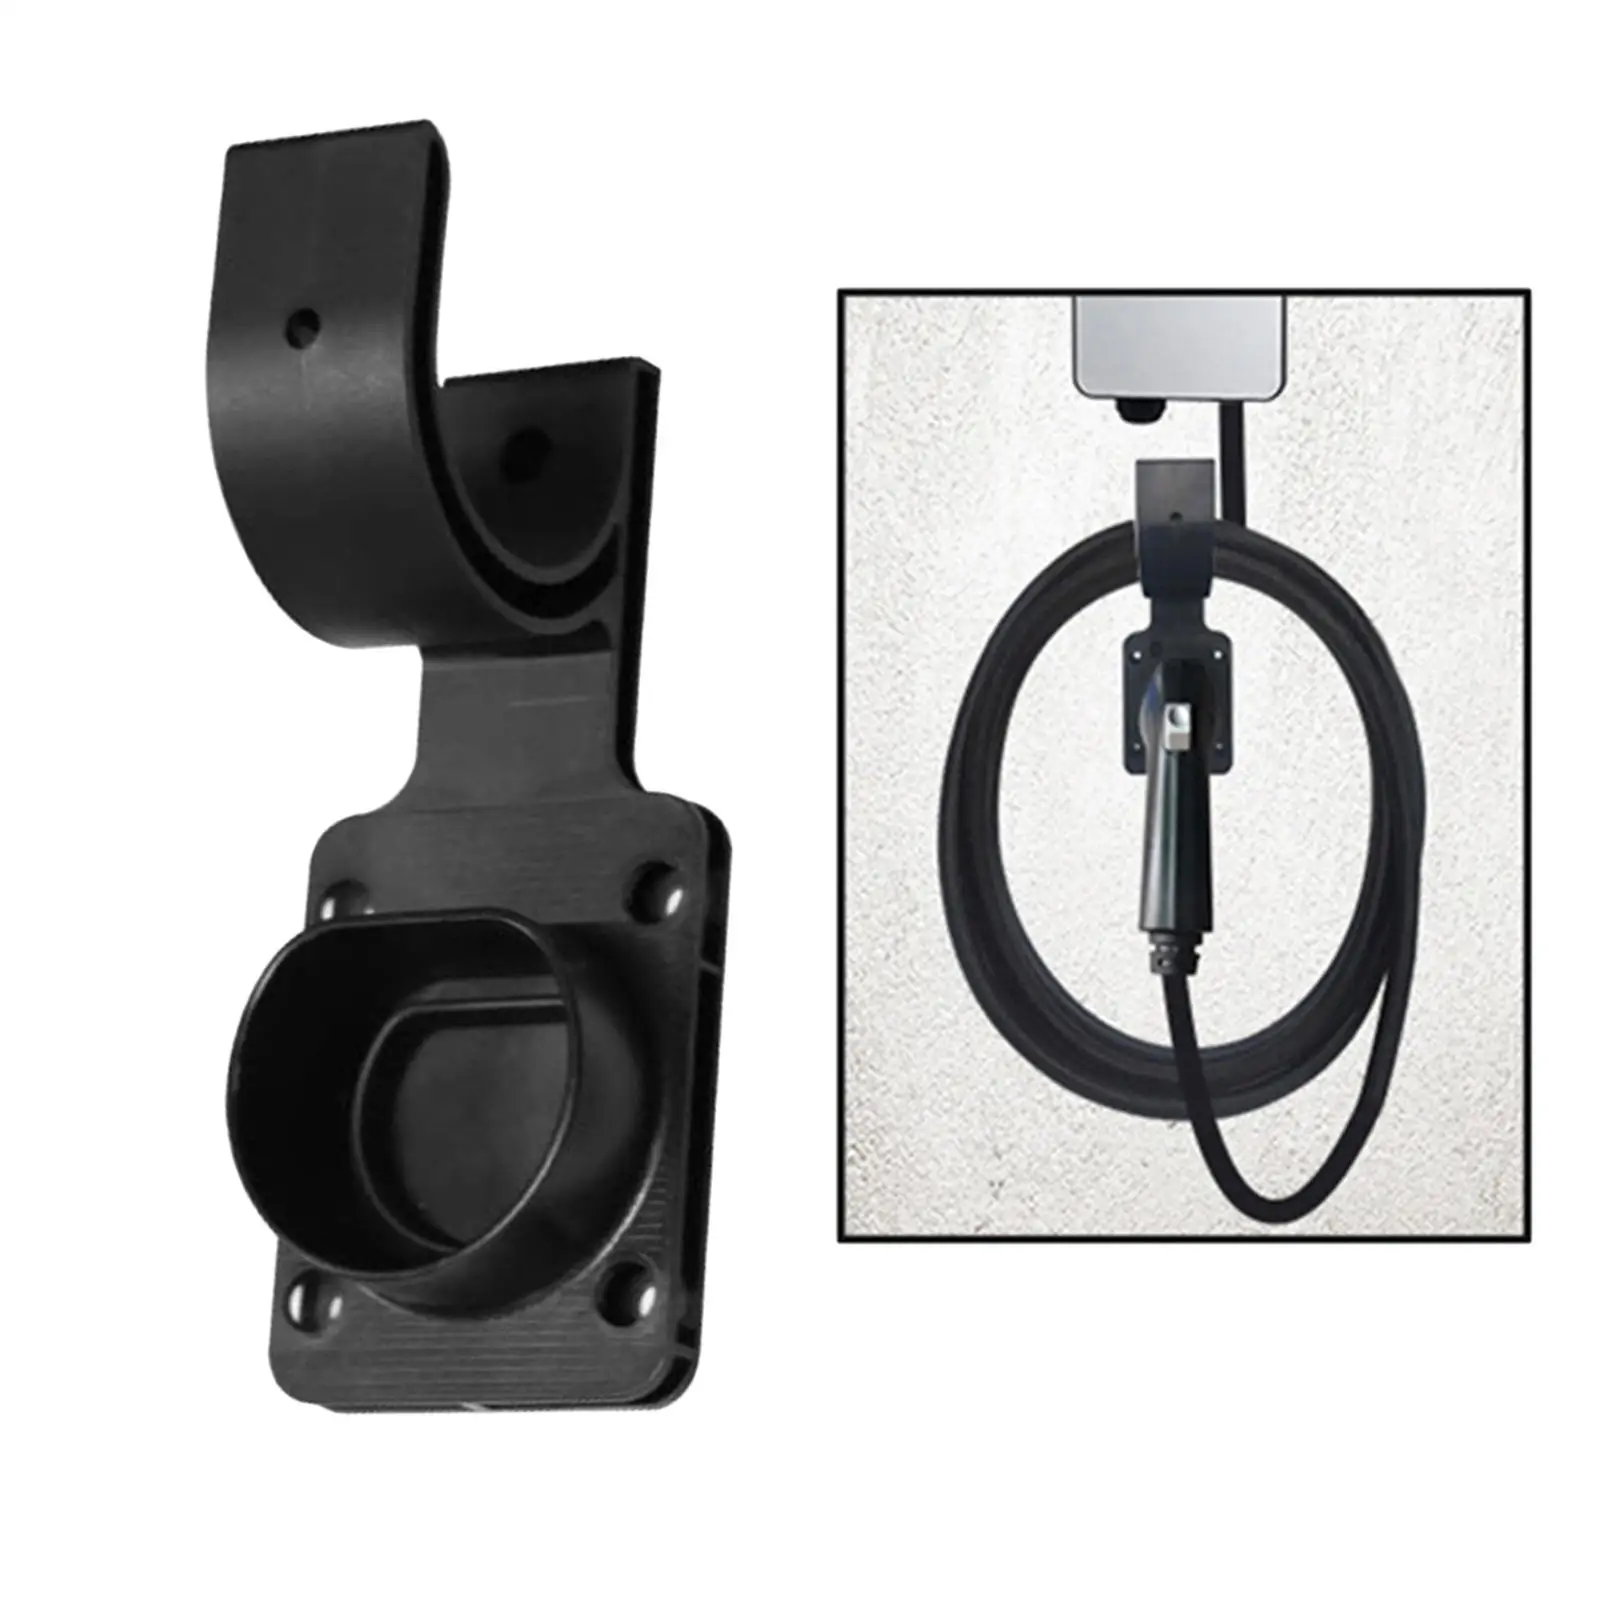 Cable Holder Head Socket Fit for Electric Vehicle